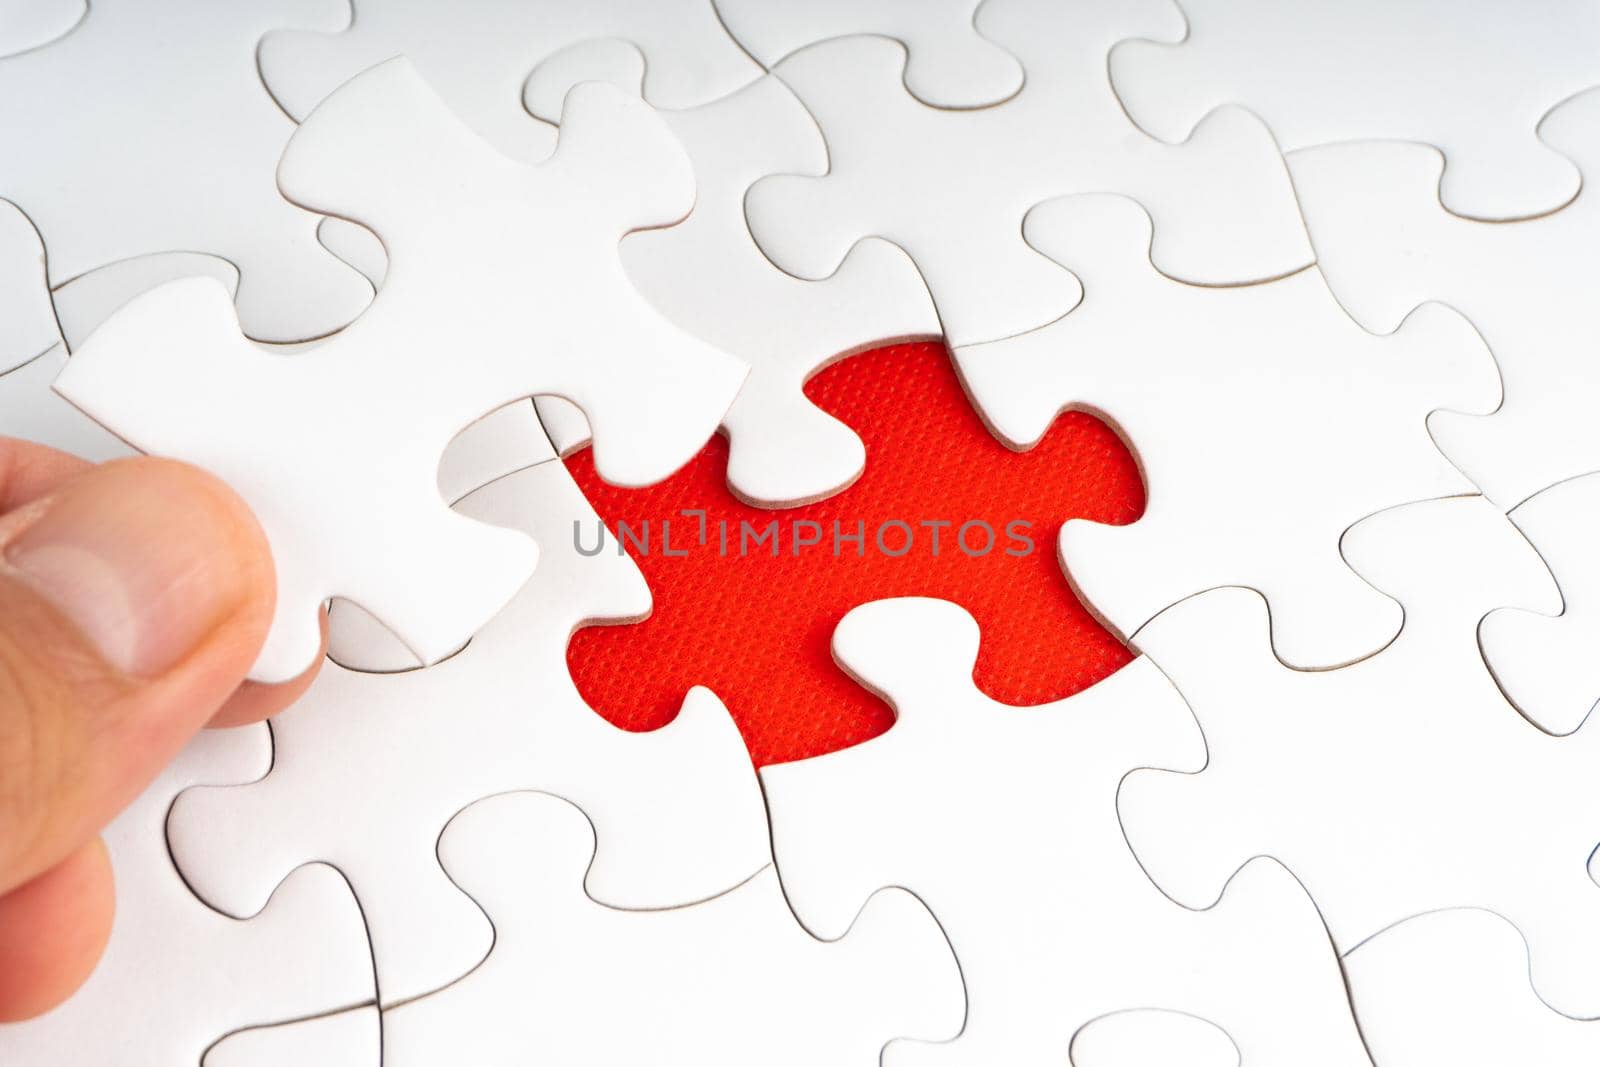 Hands holding Red jigsaw puzzle pieces on red background.nd.  by silverwings